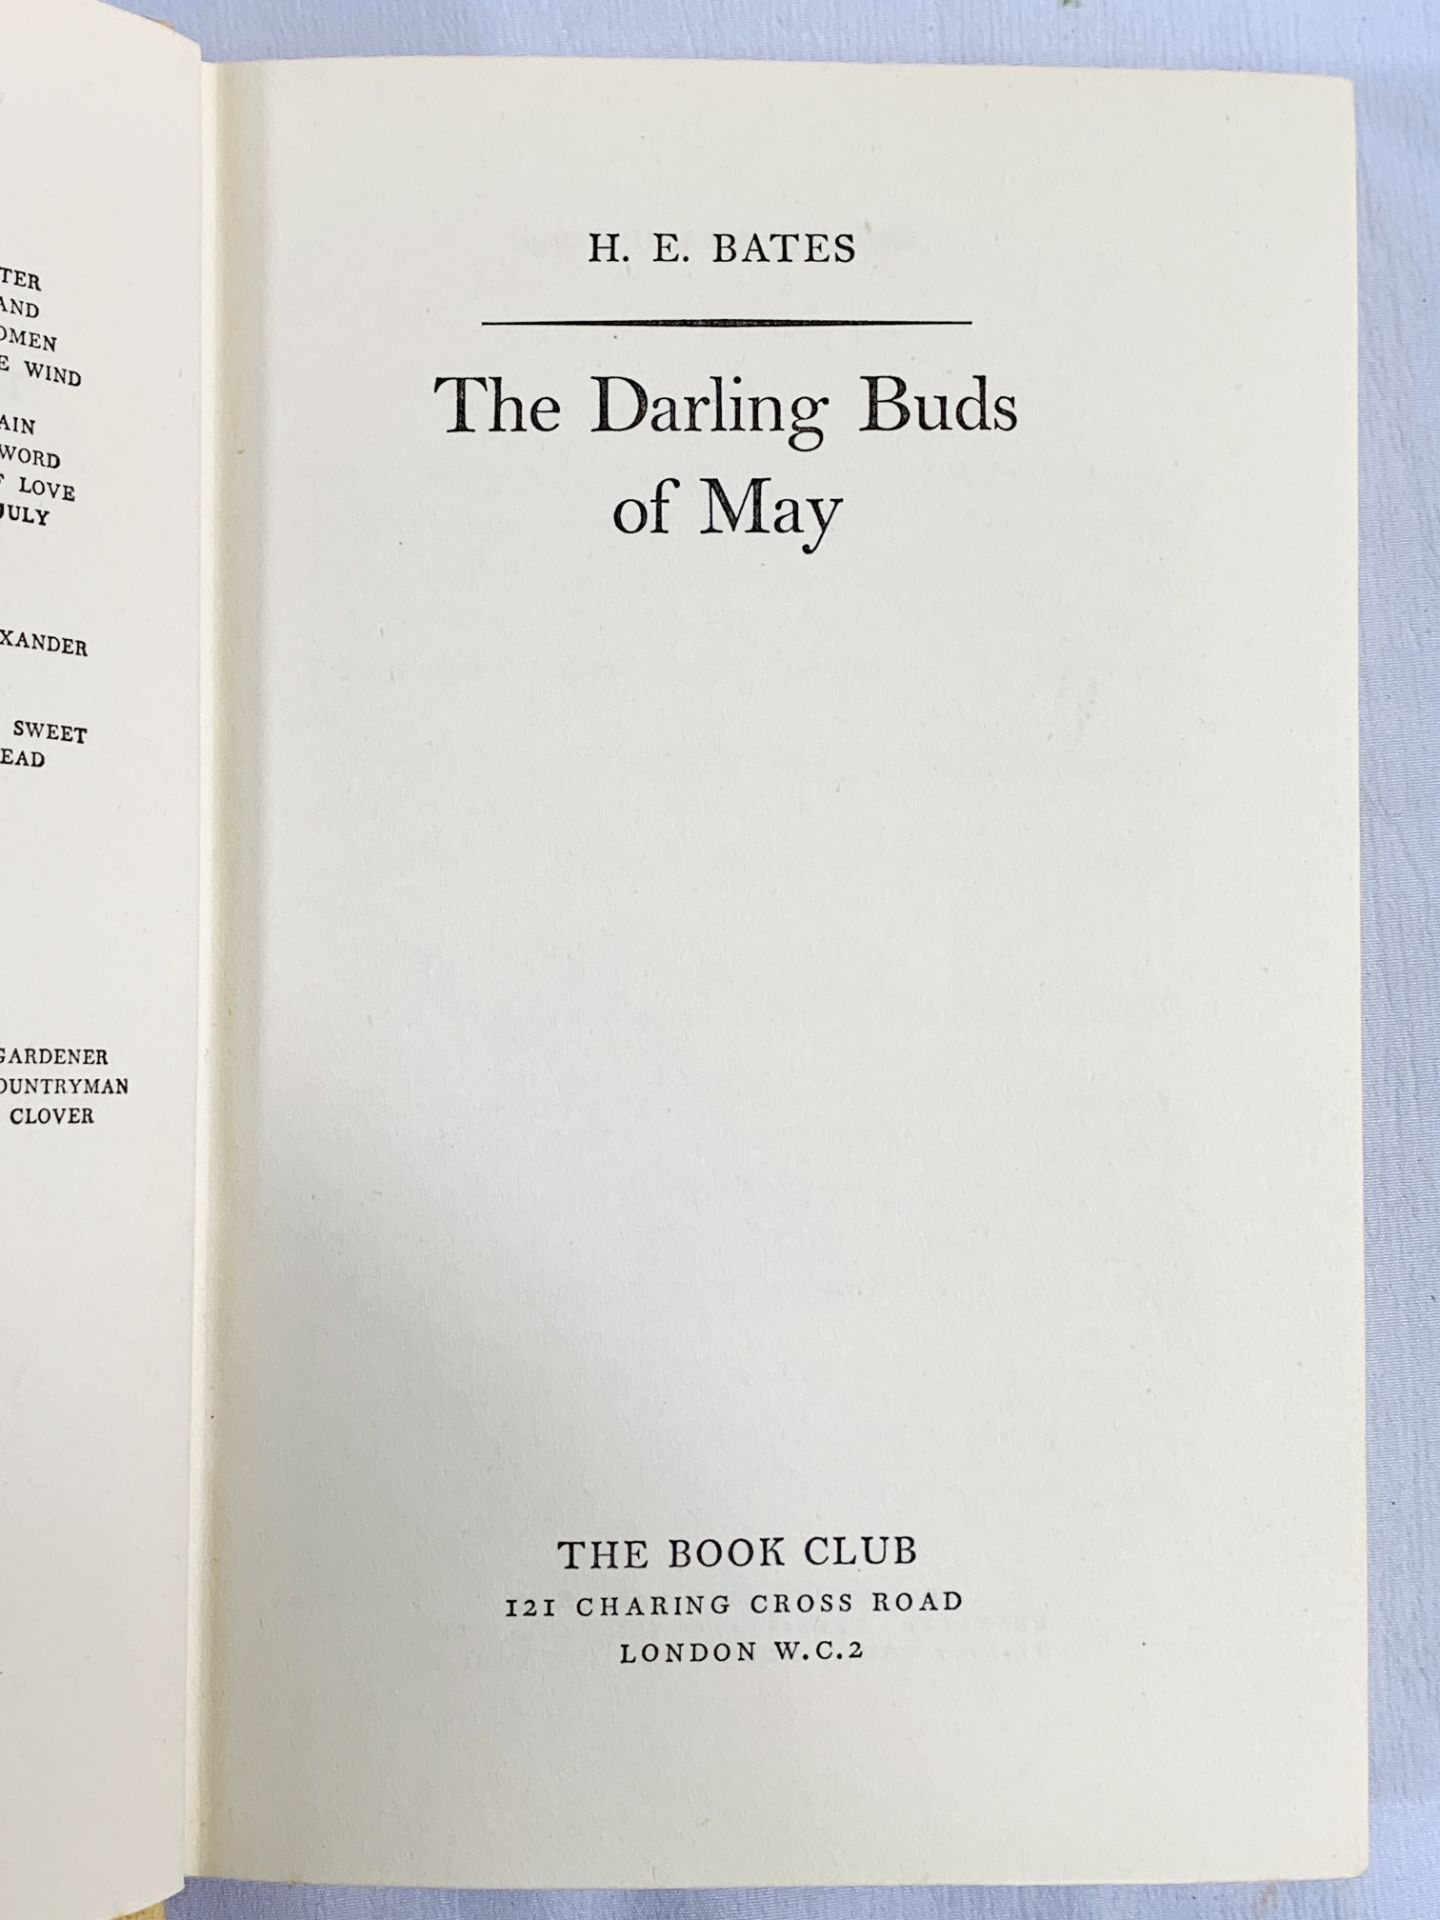 The Darling Buds of May, H.E. Bates, 1958 - Image 2 of 3